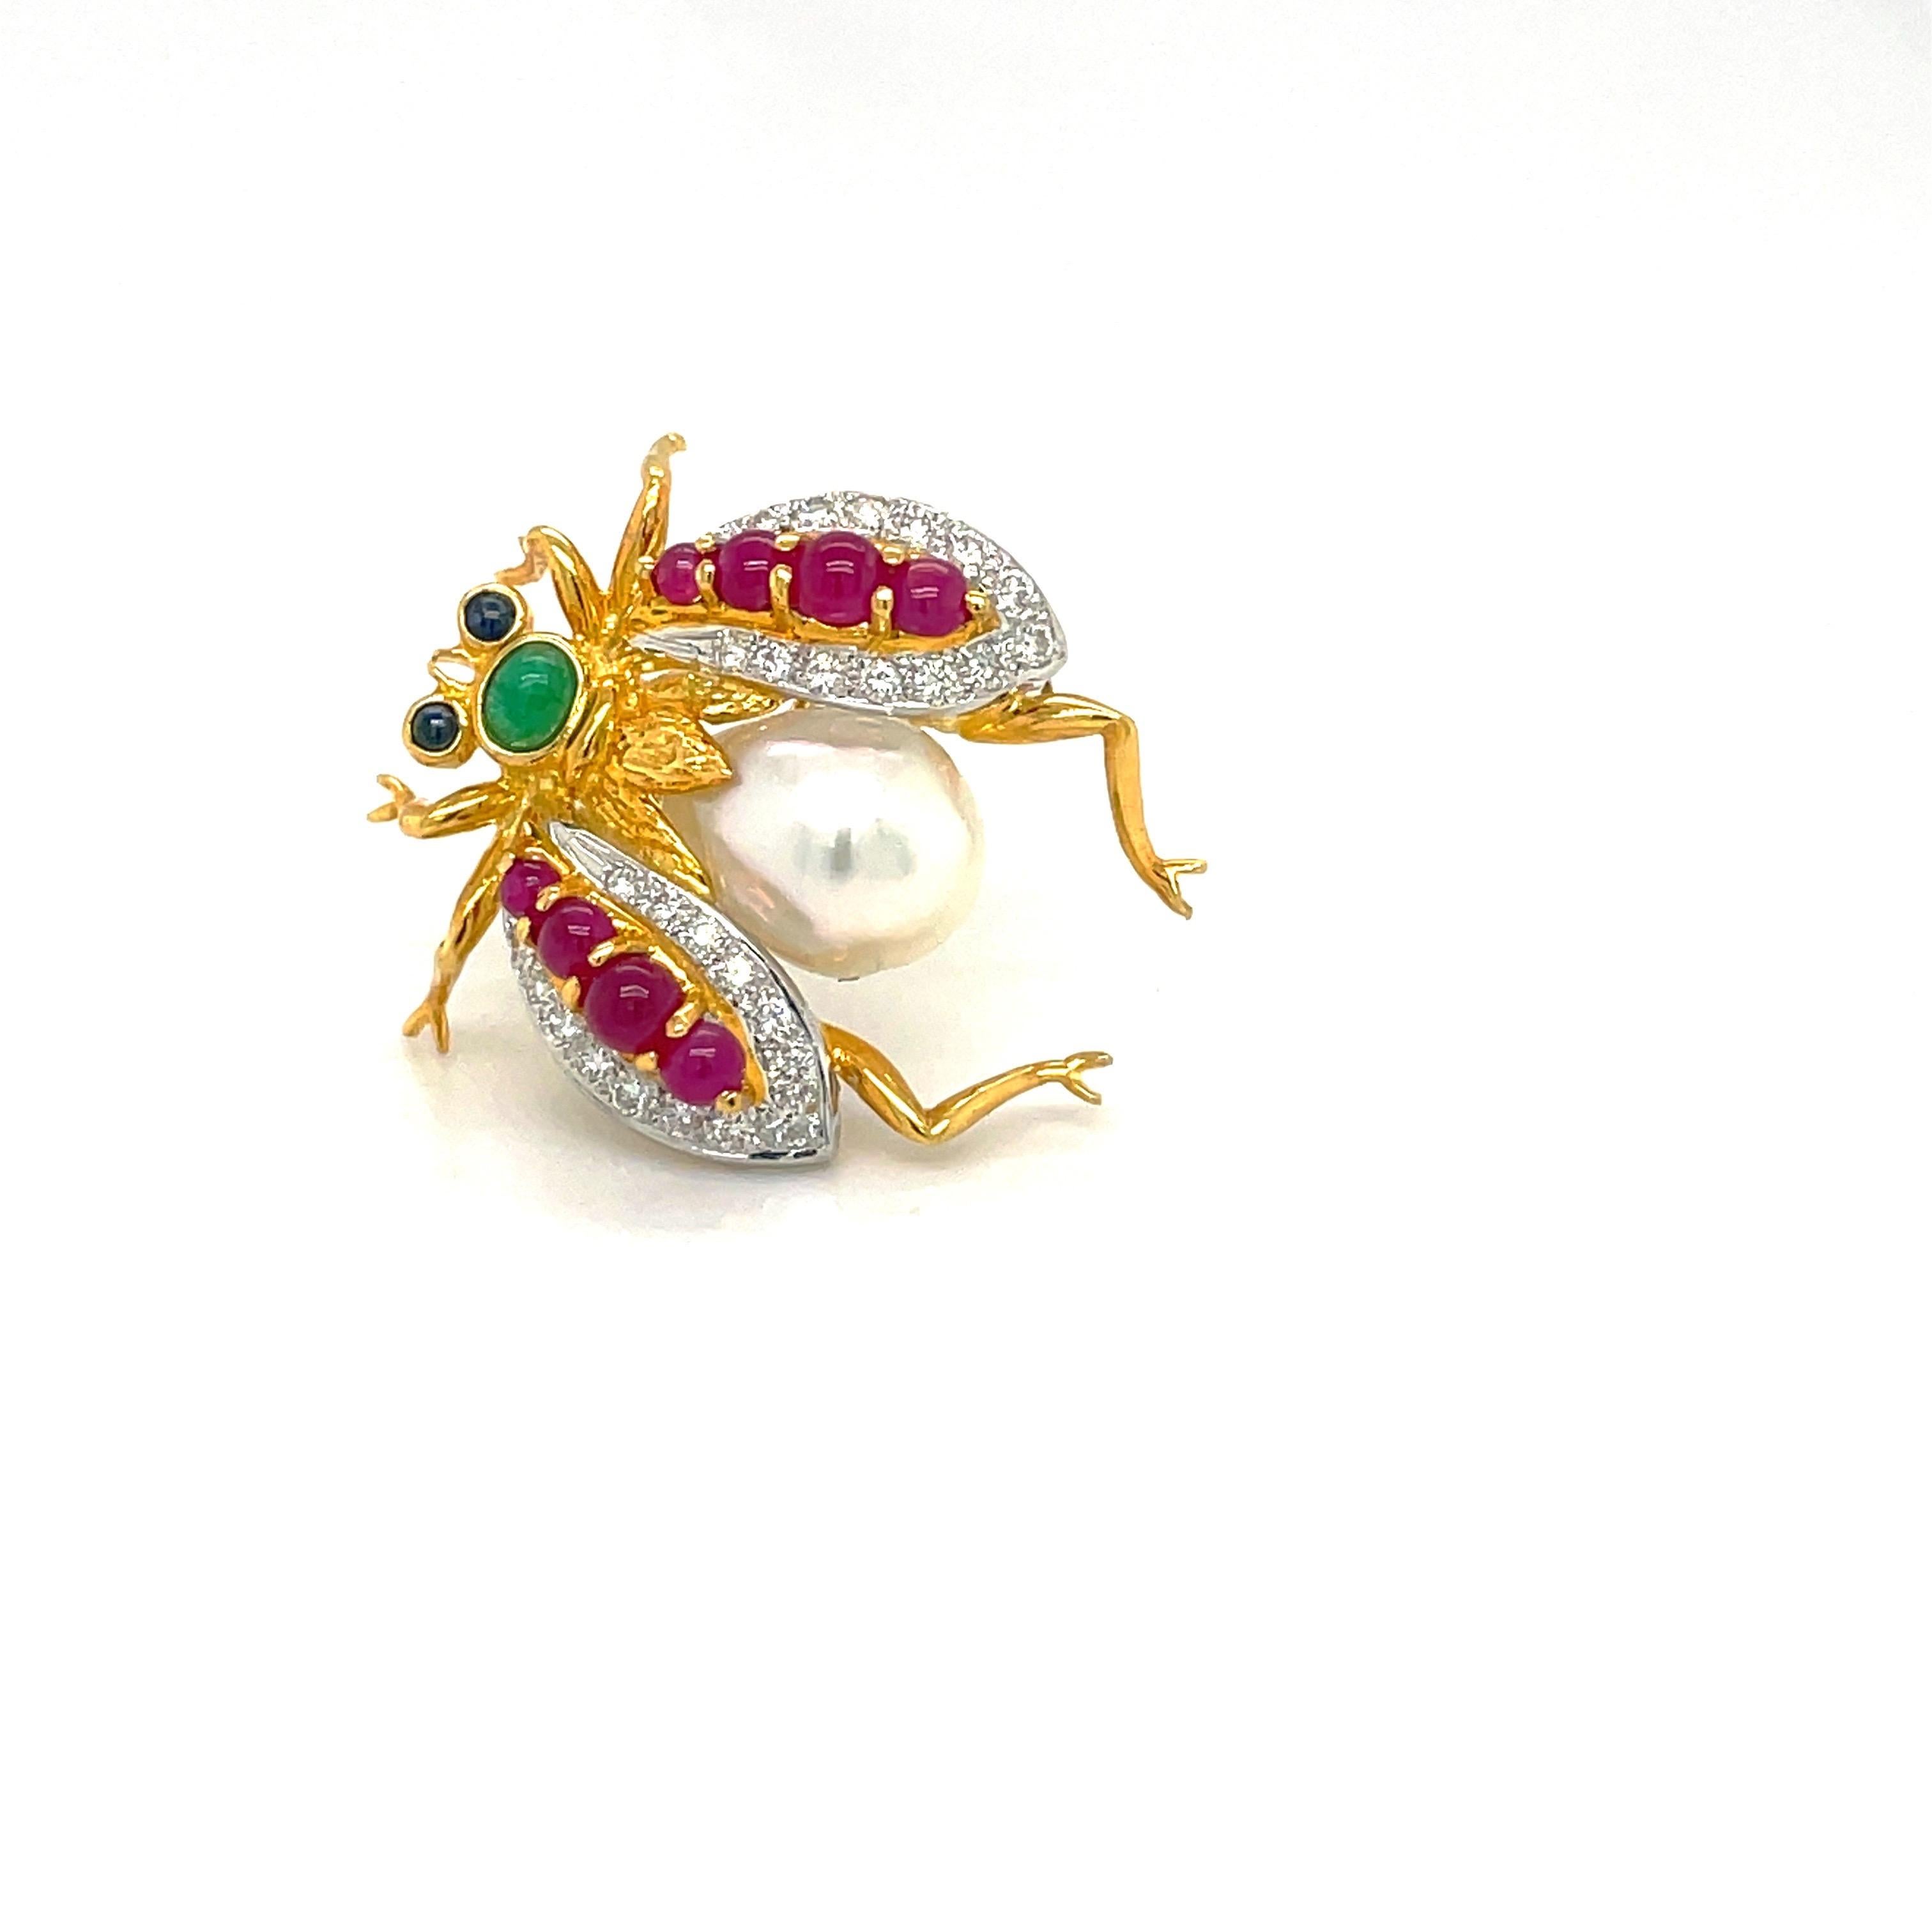 A beautifully designed 18 karat yellow gold bee brooch. The bee's wings are set with round brilliant diamonds and cabochon rubies. The body is set with a 12 x 8.5 mm South Sea Pearl . The  head and eyes are cabochon emerald and blue sapphire. The